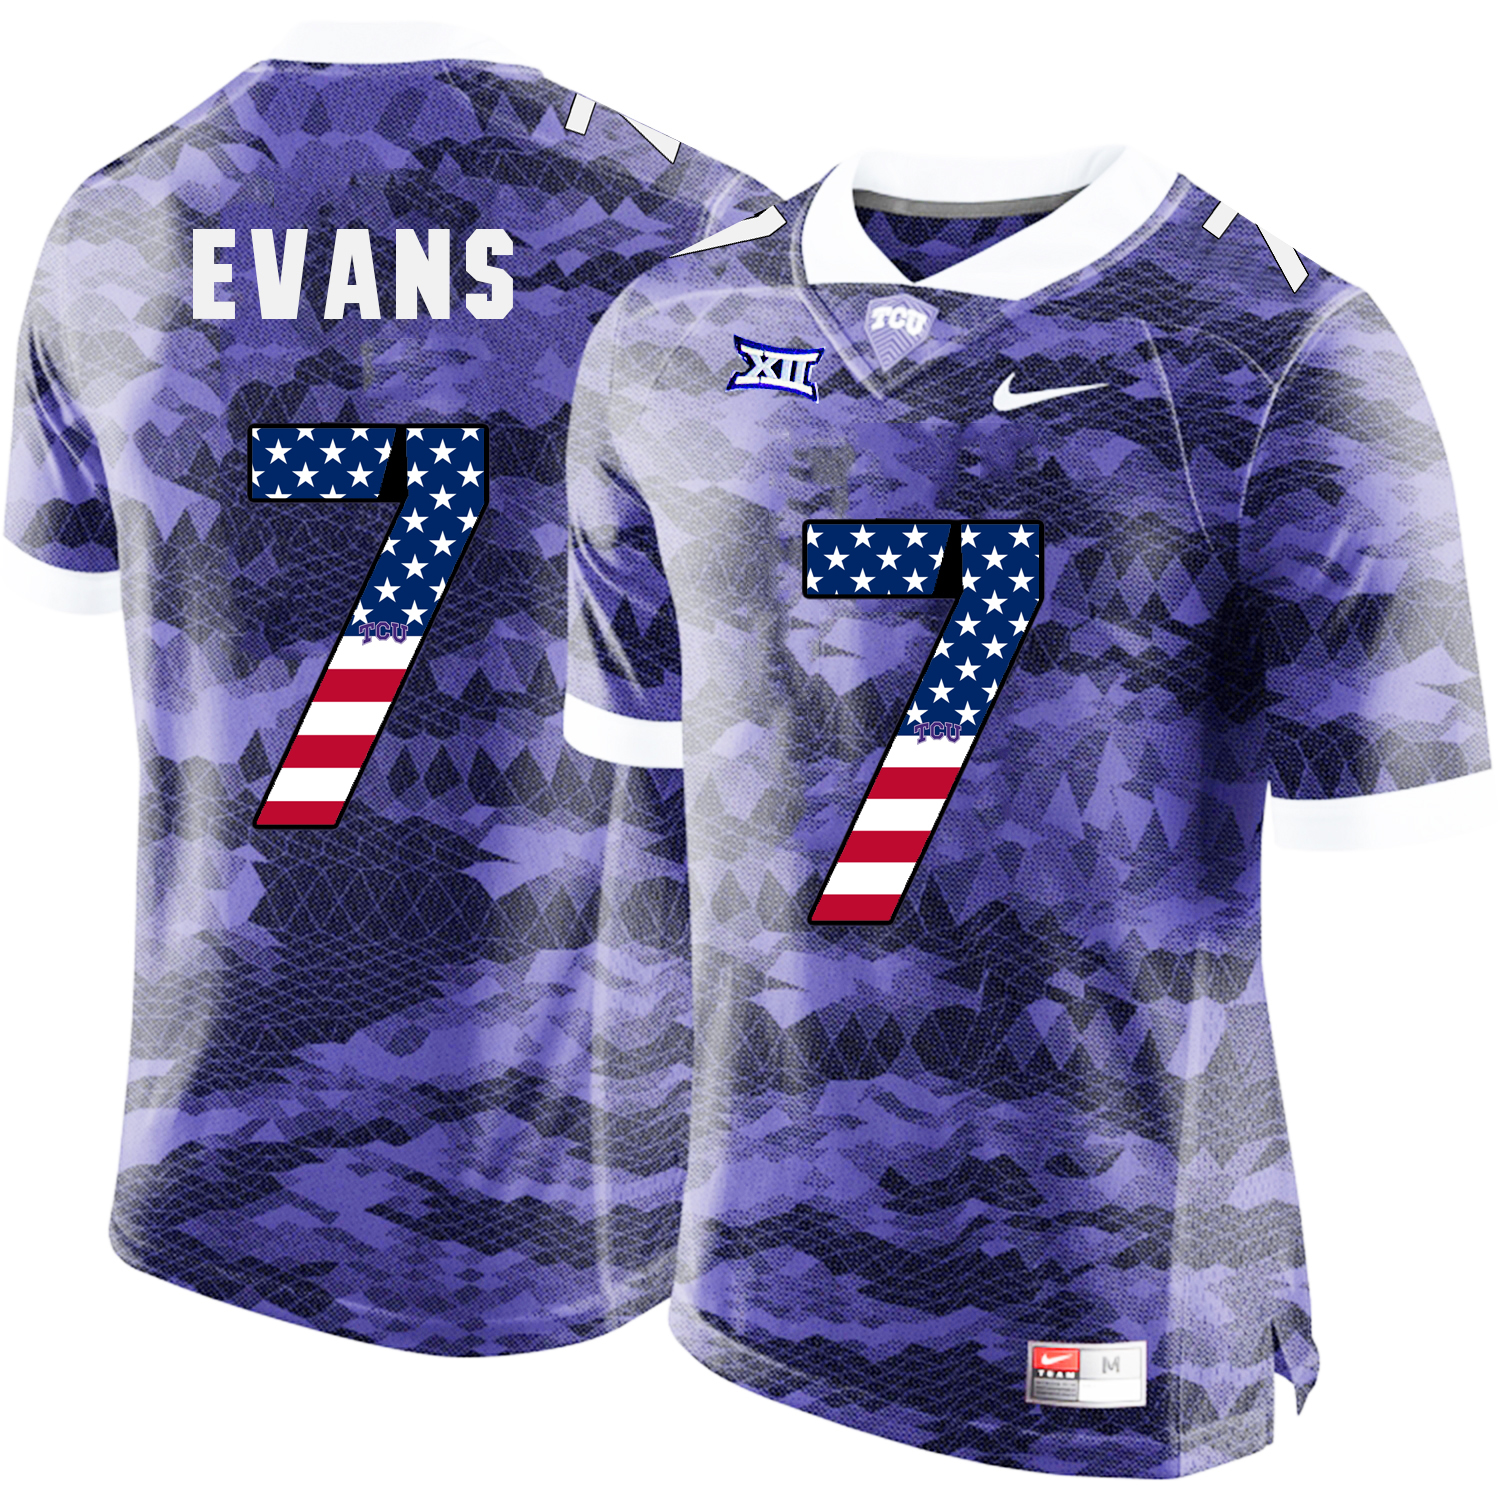 TCU Horned Frogs 7 EVANS Purple USA Flag College Football Jersey